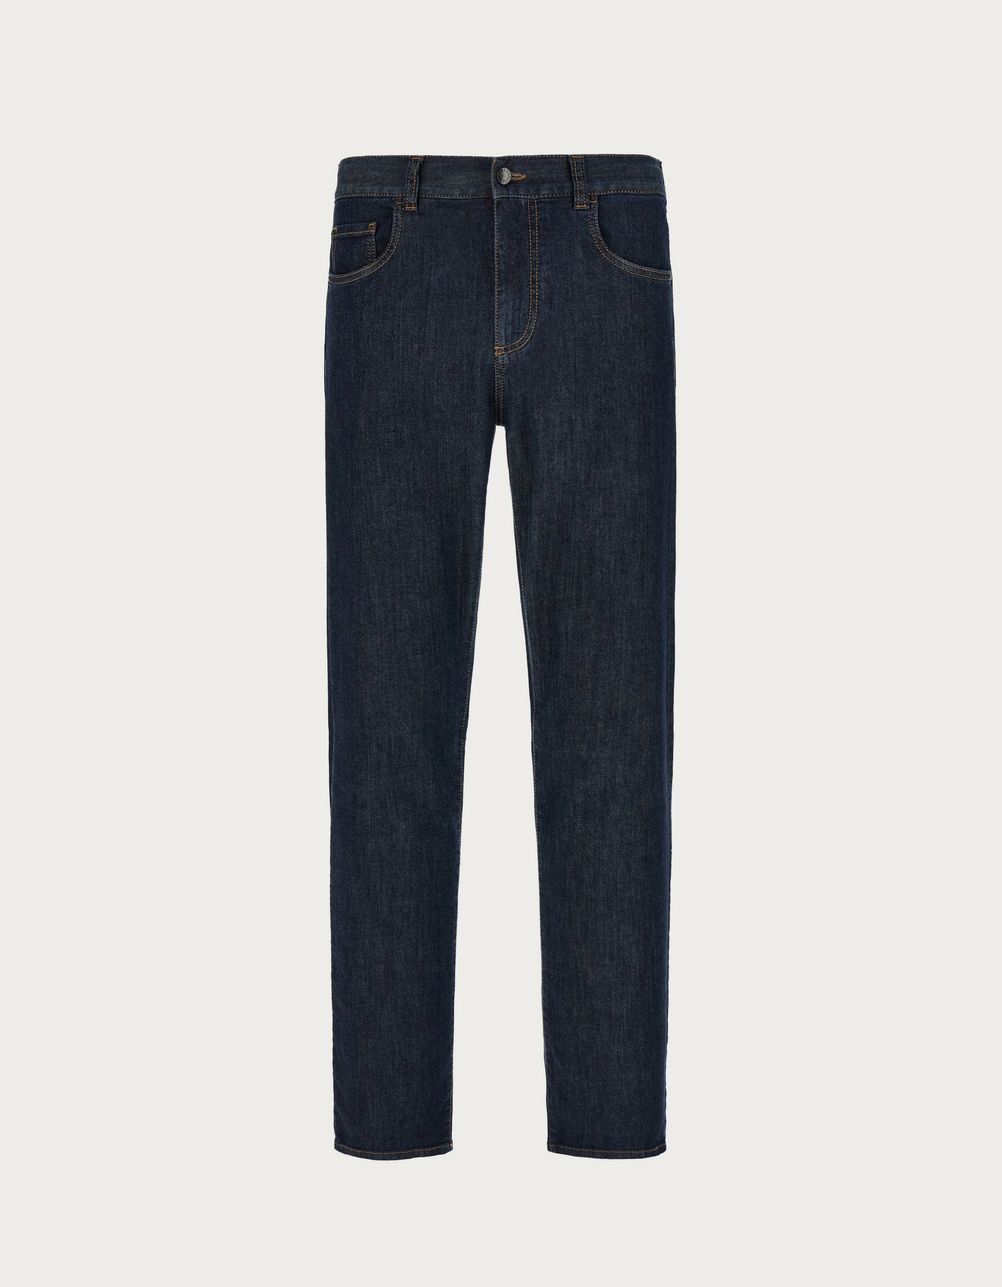 Five-pocket pants in blue soft-touch stretch denim